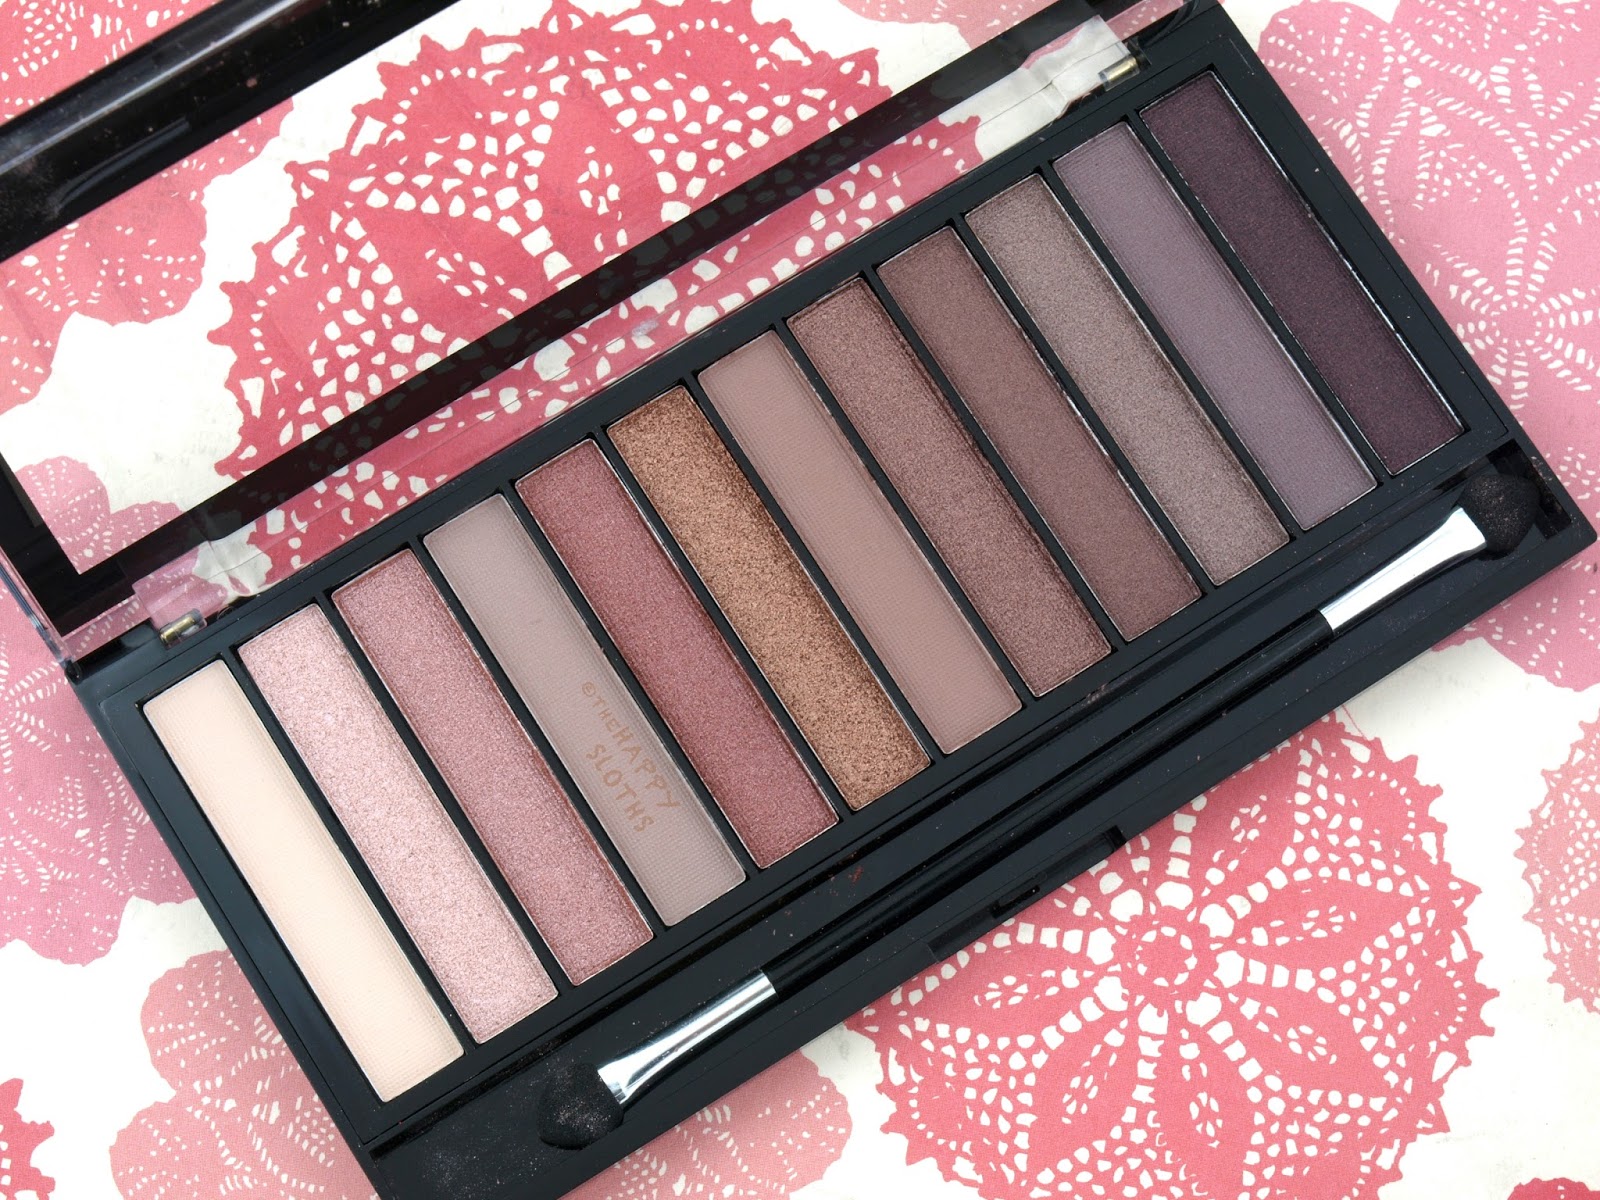 Makeup Revolution Iconic 3 Eyeshadow Palette: Review and Swatches | The Happy Sloths: Beauty, Makeup, and Blog with Reviews and Swatches